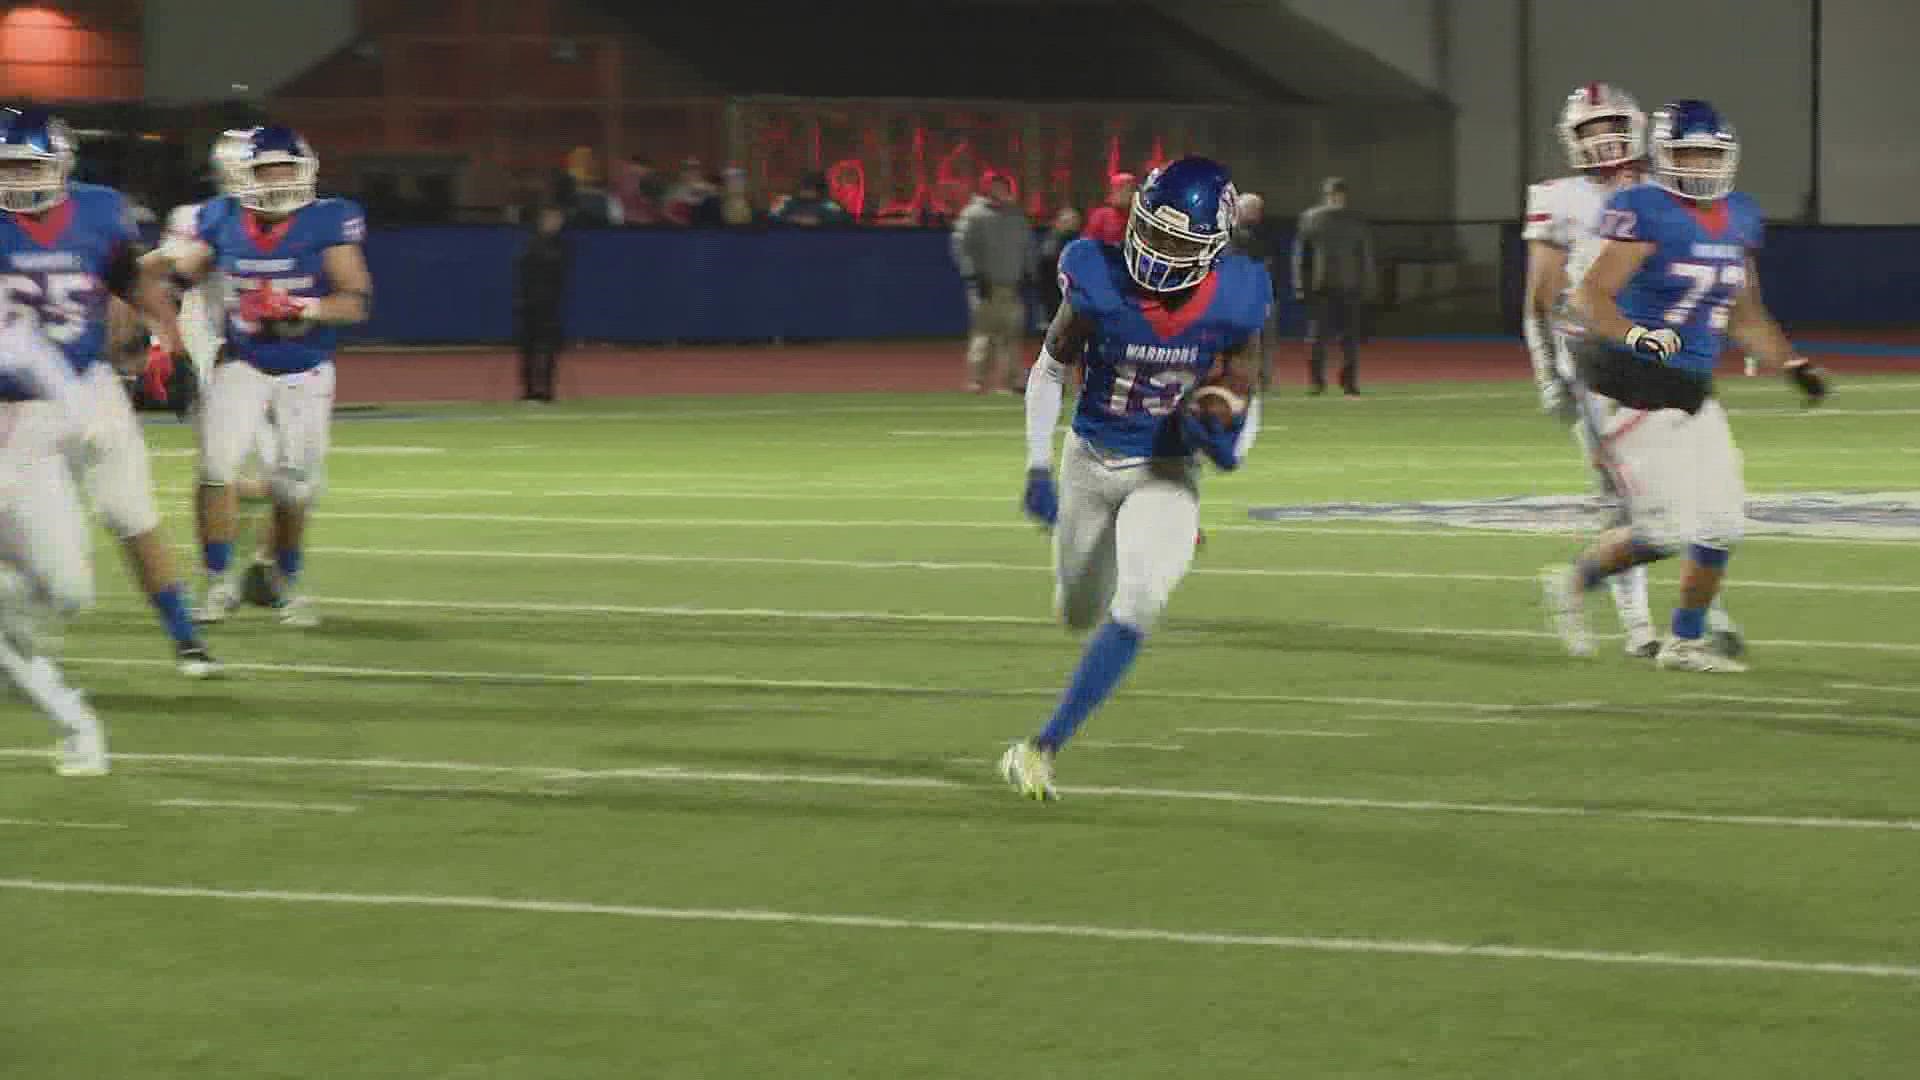 Whiteland is headed for the Class 5A semi state after a win Friday night on Operation Football!